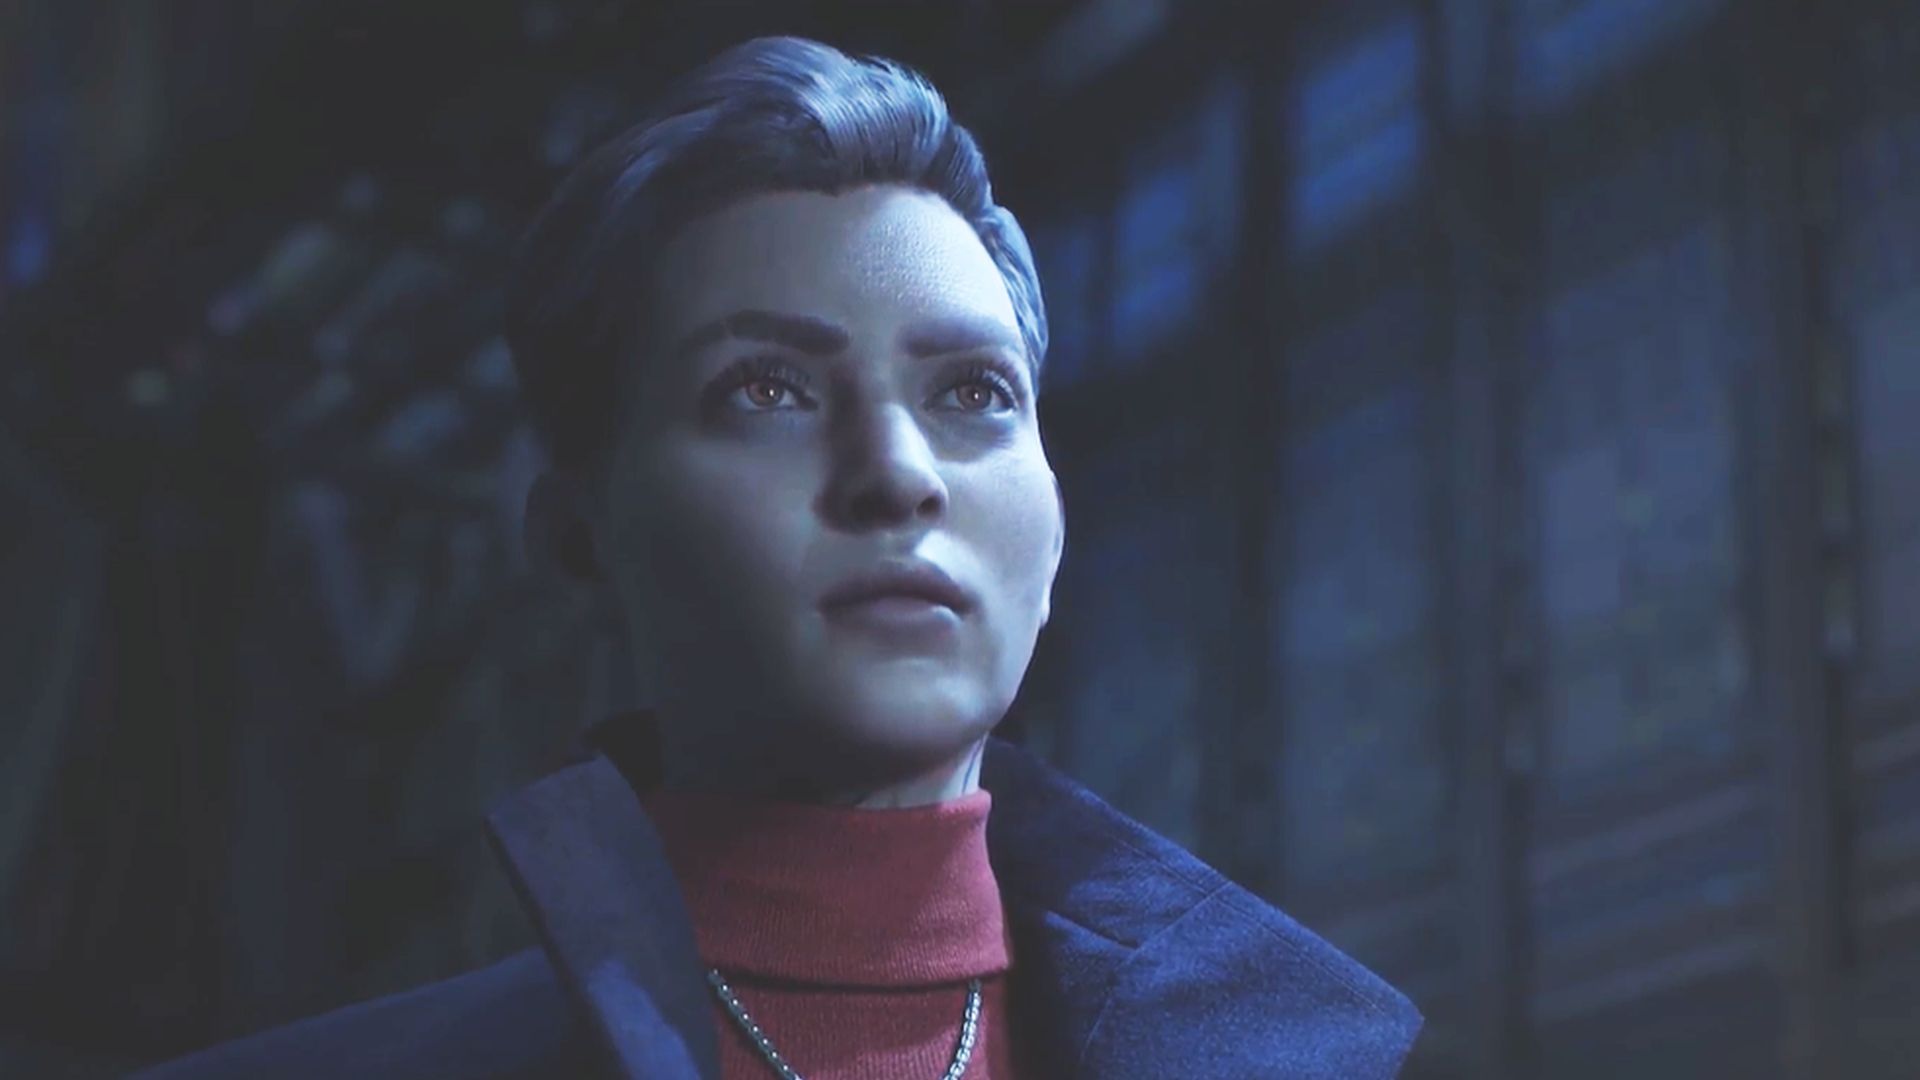 Meet Phyre, the protagonist of Vampire the Masquerade: Bloodlines 2 -  Gayming Magazine